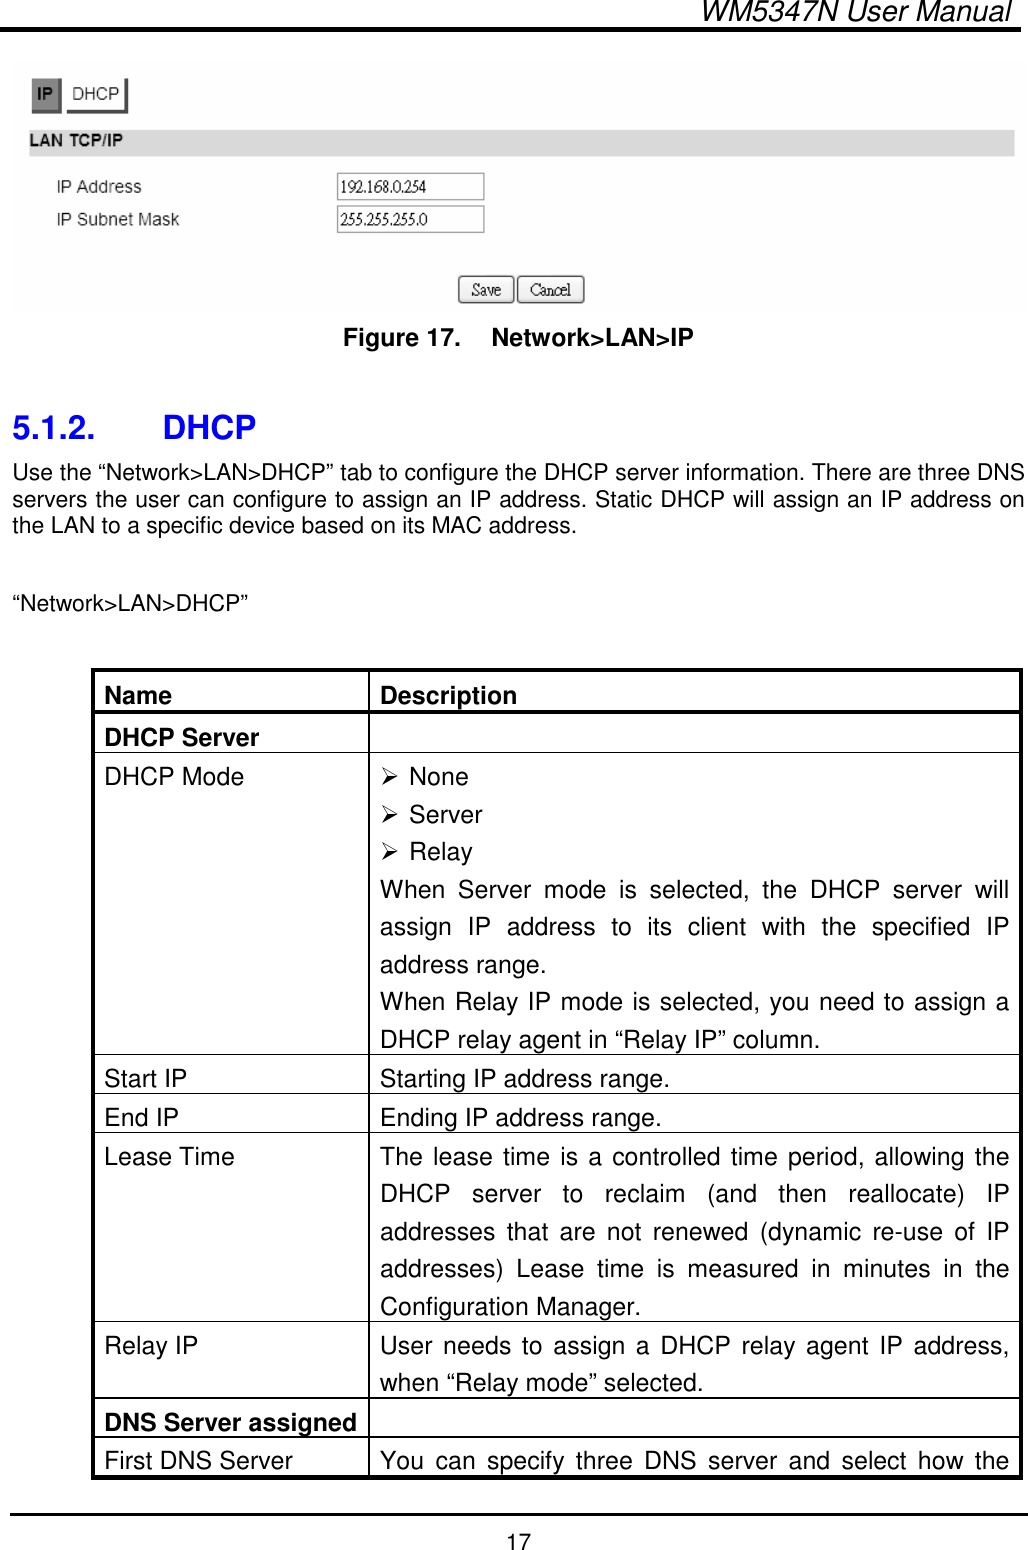  WM5347N User Manual  17  Figure 17.   Network&gt;LAN&gt;IP  5.1.2.  DHCP Use the “Network&gt;LAN&gt;DHCP” tab to configure the DHCP server information. There are three DNS servers the user can configure to assign an IP address. Static DHCP will assign an IP address on the LAN to a specific device based on its MAC address.  “Network&gt;LAN&gt;DHCP”  Name  Description DHCP Server   DHCP Mode   None  Server  Relay When  Server  mode  is  selected,  the  DHCP  server  will assign  IP  address  to  its  client  with  the  specified  IP address range. When Relay IP mode is selected, you need to assign a DHCP relay agent in “Relay IP” column. Start IP  Starting IP address range. End IP  Ending IP address range. Lease Time  The lease time is a controlled time period, allowing the DHCP  server  to  reclaim  (and  then  reallocate)  IP addresses  that are  not  renewed  (dynamic  re-use  of  IP addresses)  Lease  time  is  measured  in  minutes  in  the Configuration Manager. Relay IP  User needs to assign a DHCP relay agent  IP  address, when “Relay mode” selected. DNS Server assigned  First DNS Server  You  can  specify  three  DNS  server  and  select  how  the 